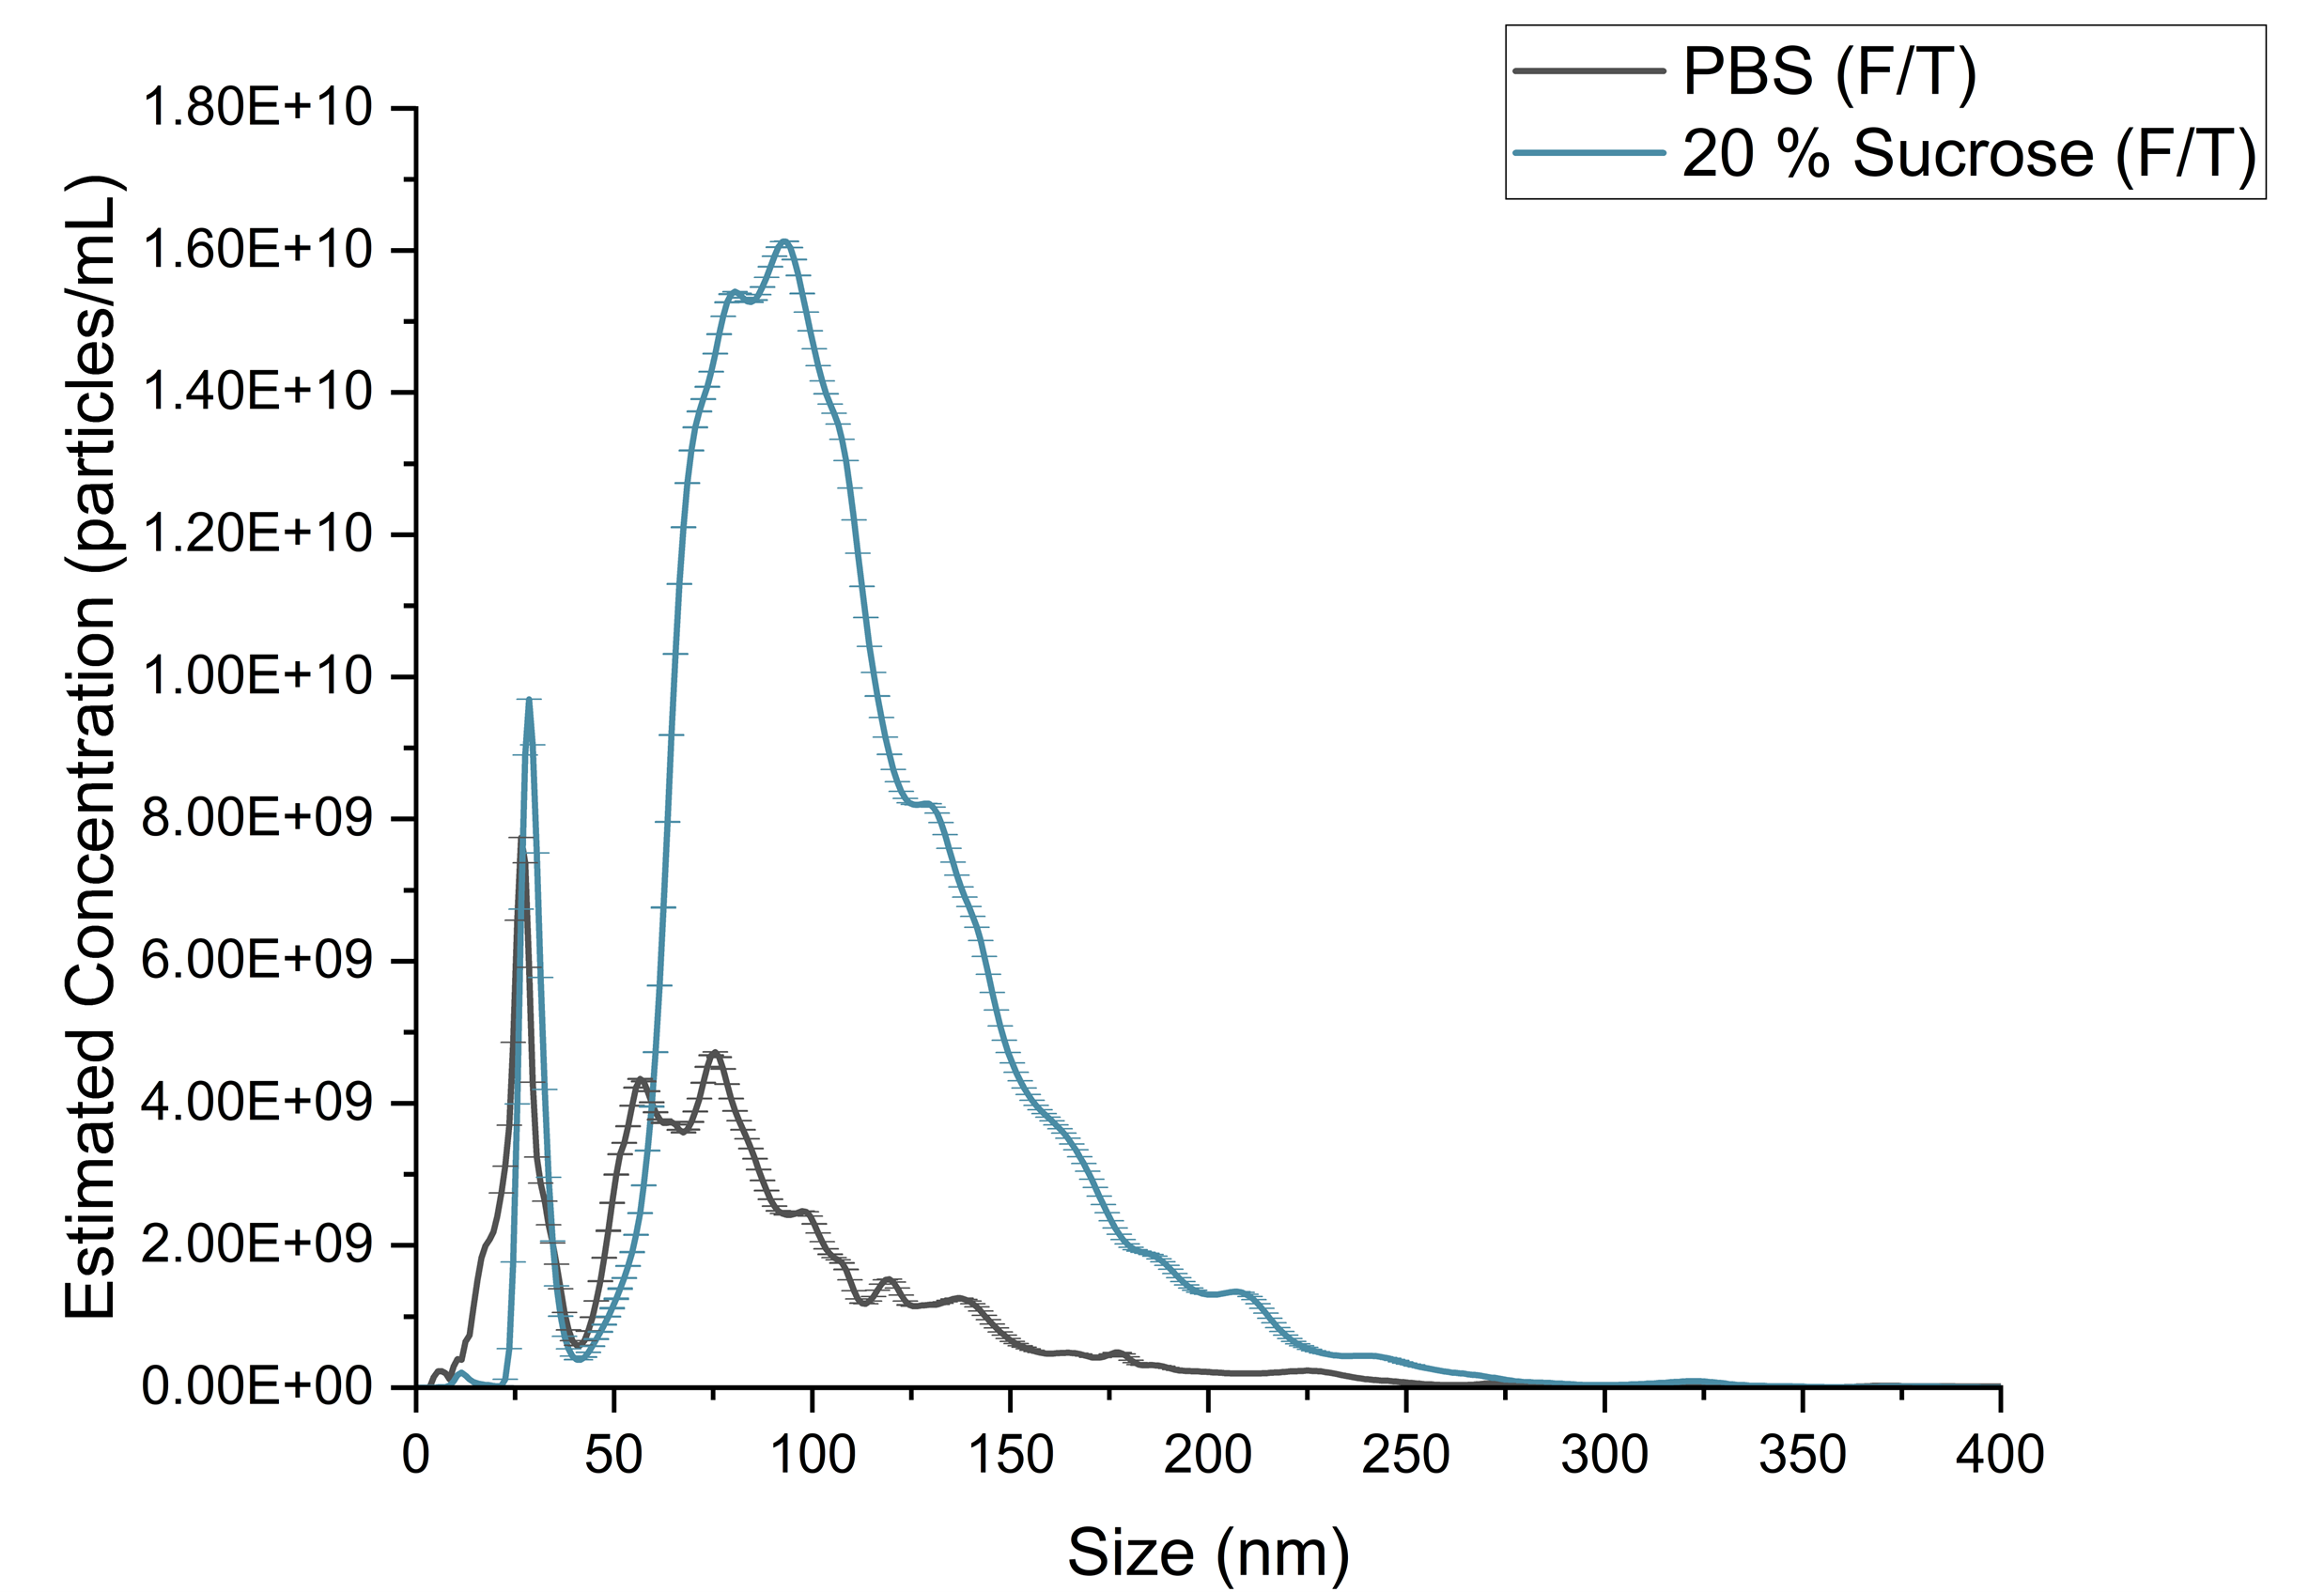 Higher or Lower? - The Resolution of Analytical Pipelines for the Evaluation of Lipid Nanoparticle Critical Quality Attributes